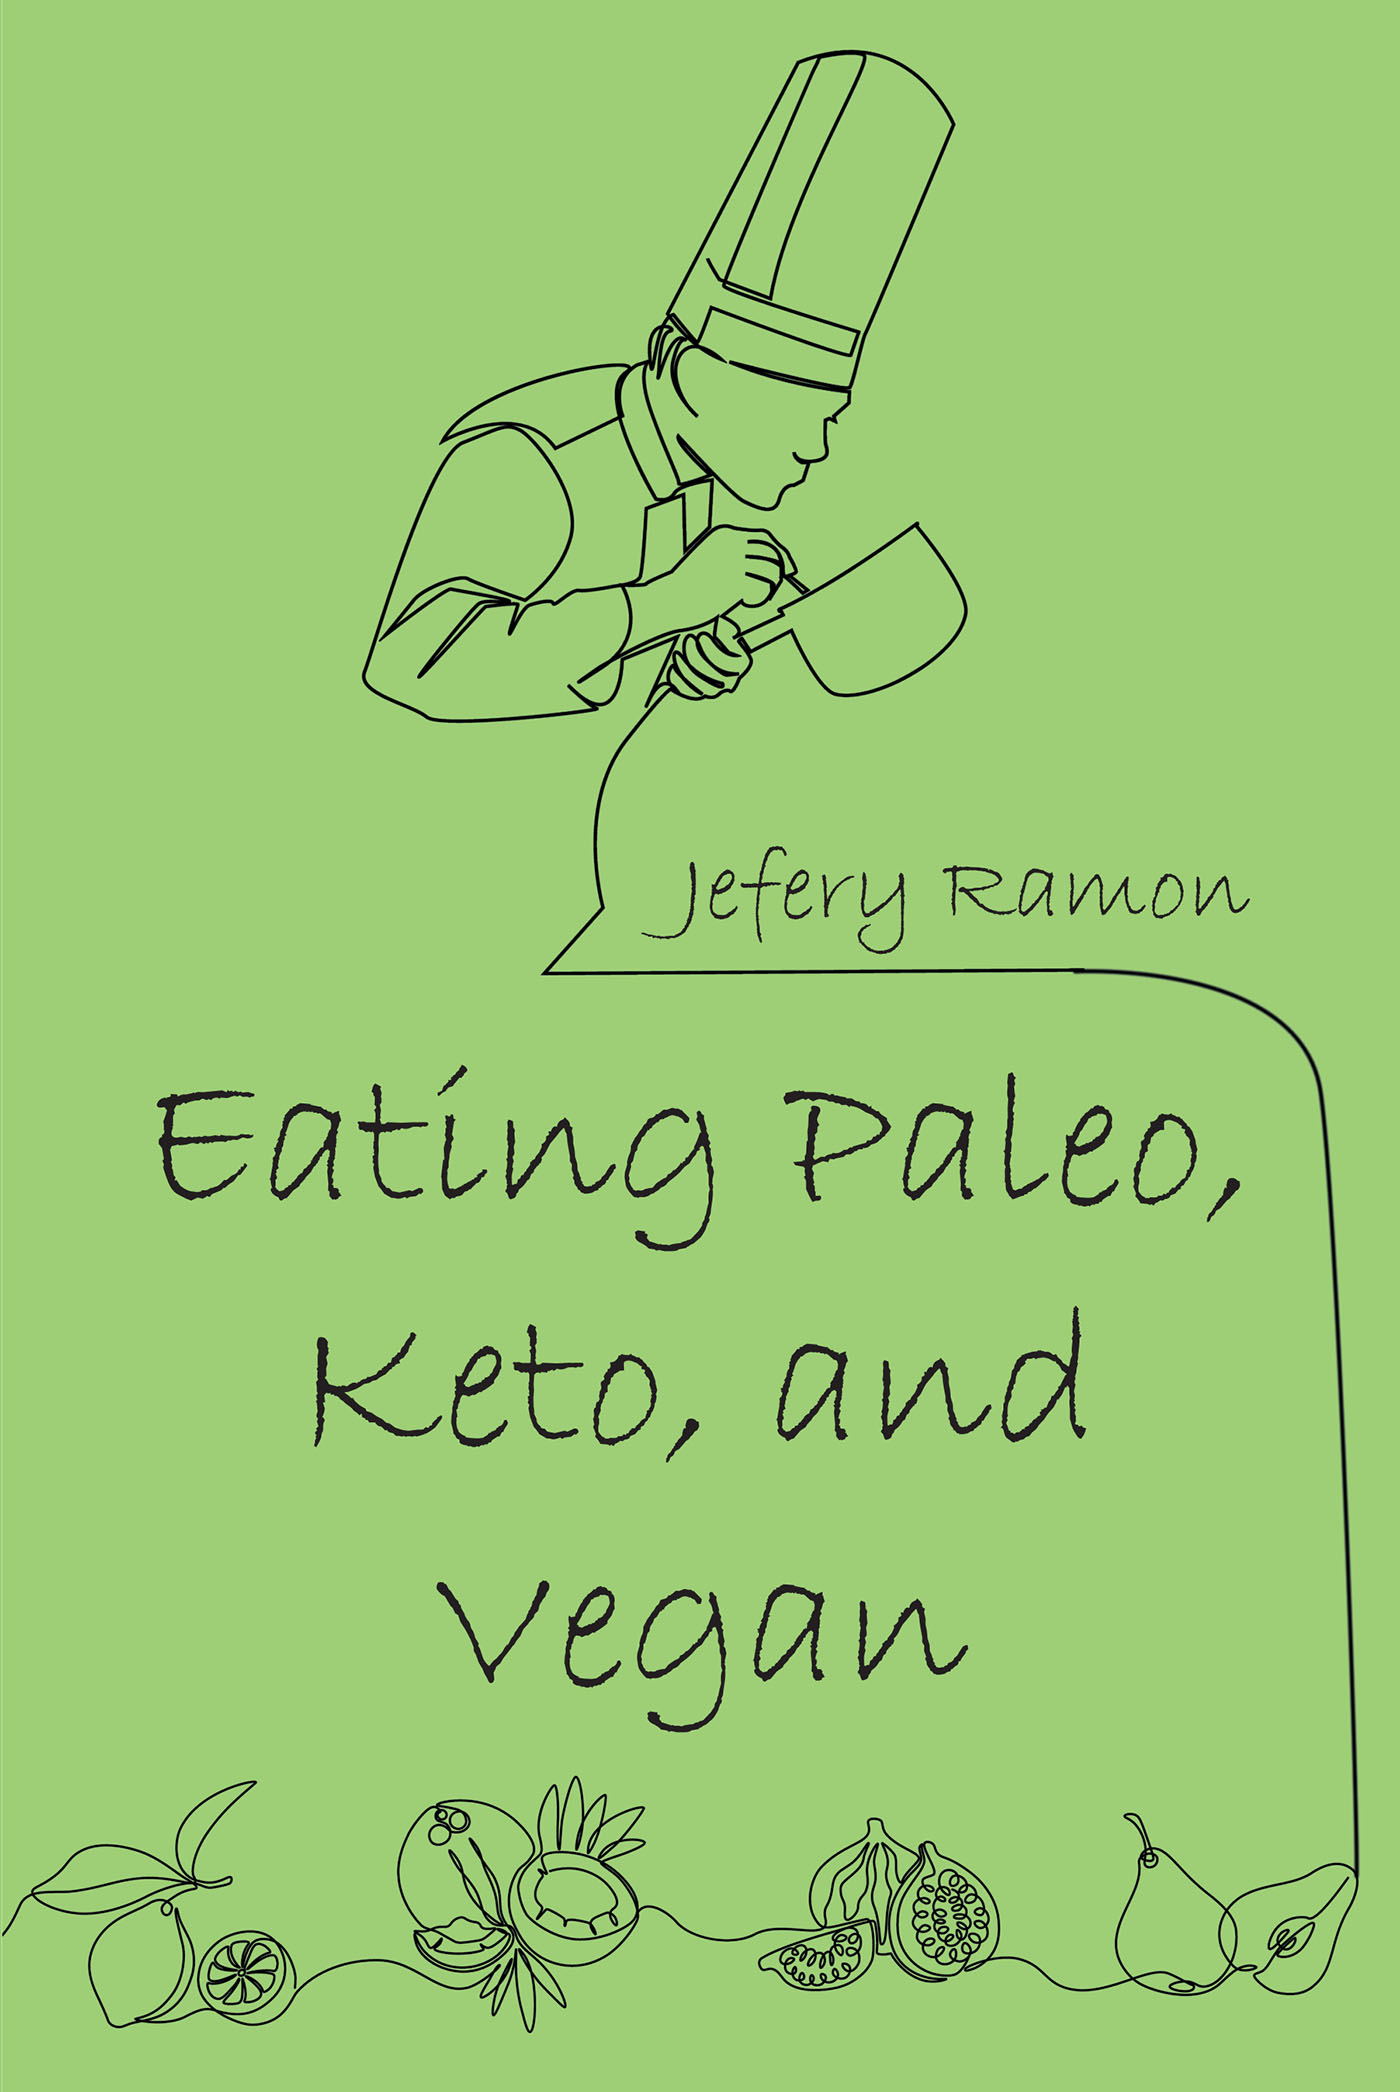 Author Jefery Ramon’s New Book, "Eating Paleo, Keto, and Vegan," is a Thorough Cookbook to Help Readers Expand Their Knowledge of Foods and How to Prepare Them